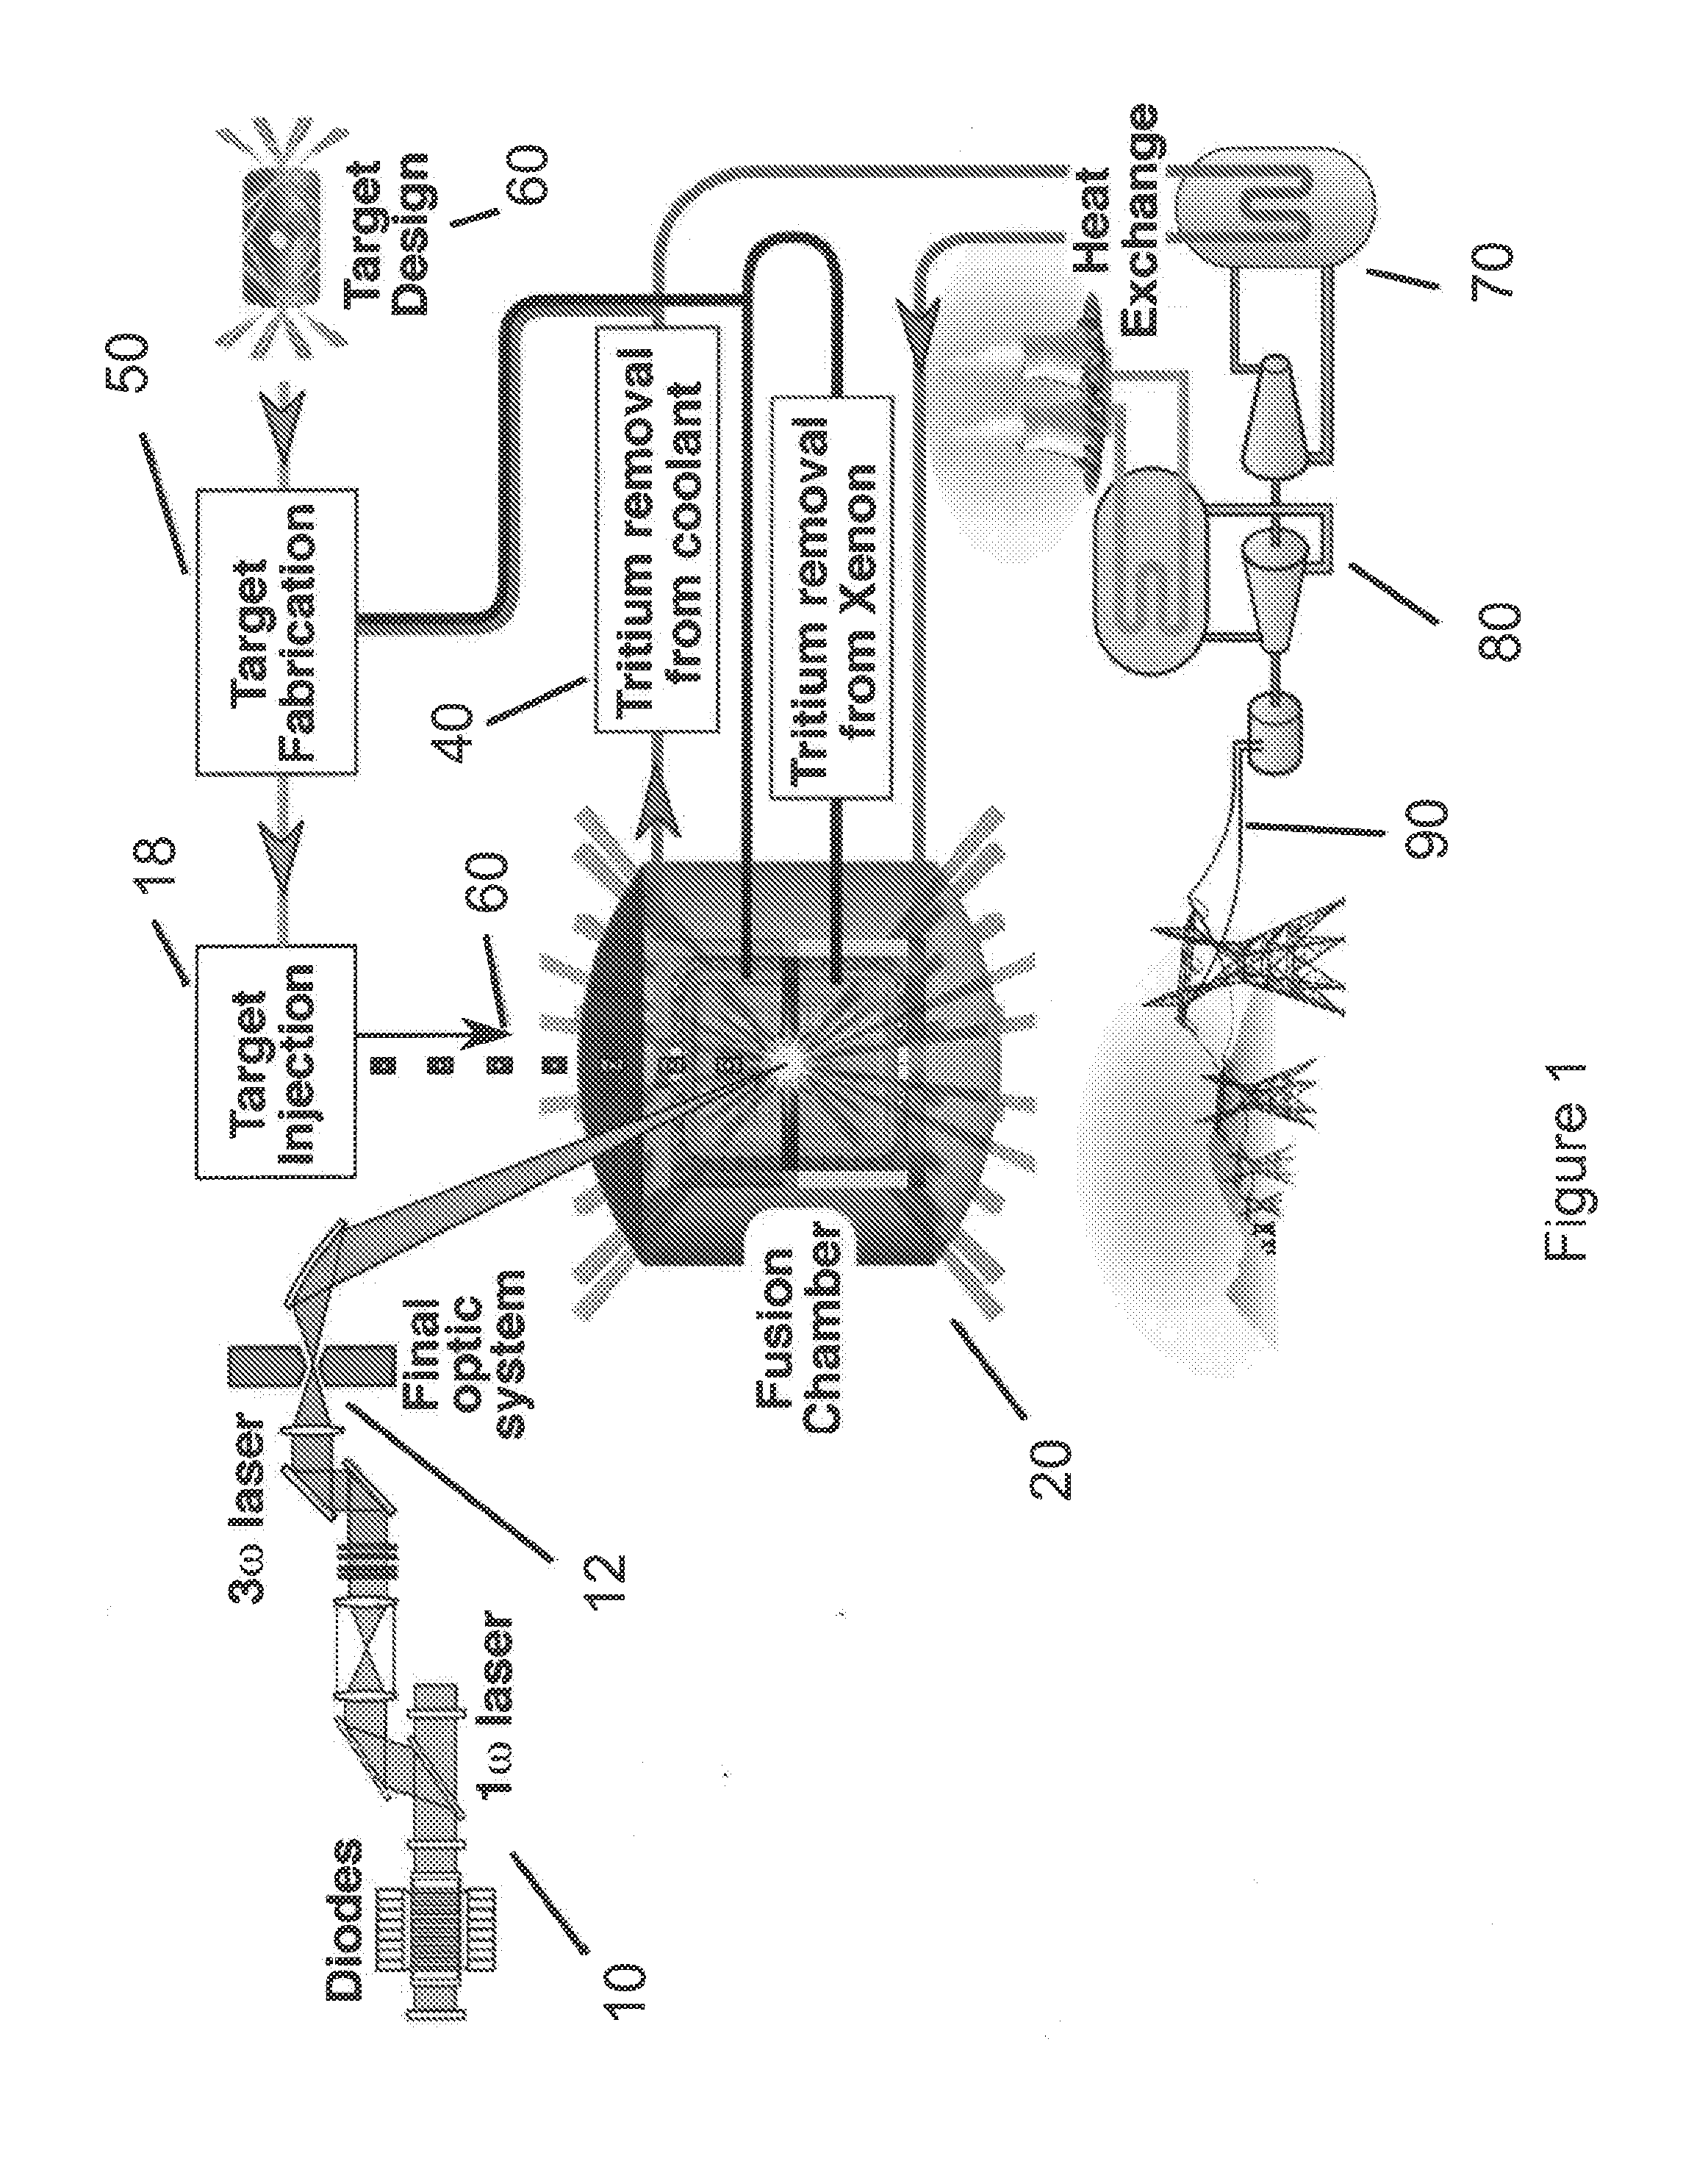 Intertial confinement fusion power plant which decouples life-limited component from plant availability